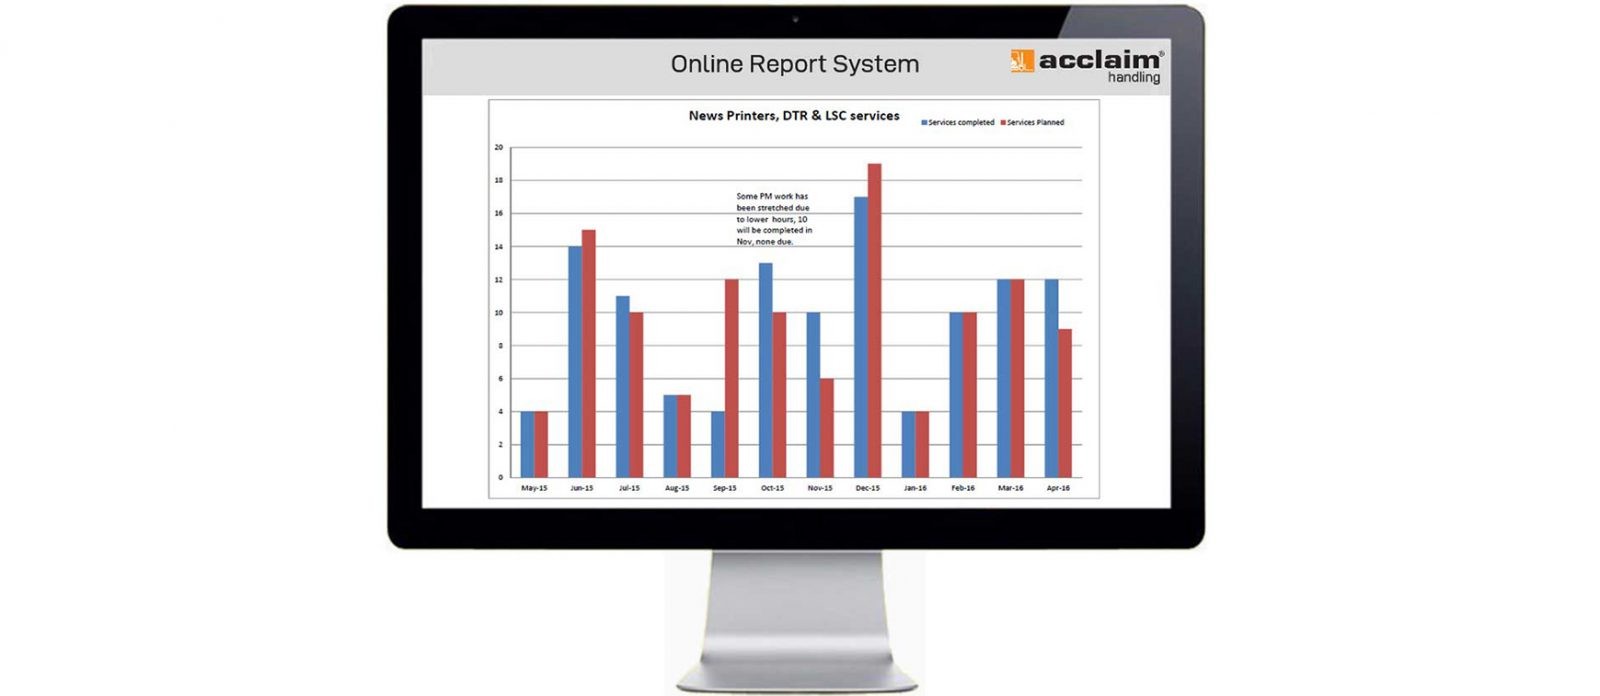 Online Report System